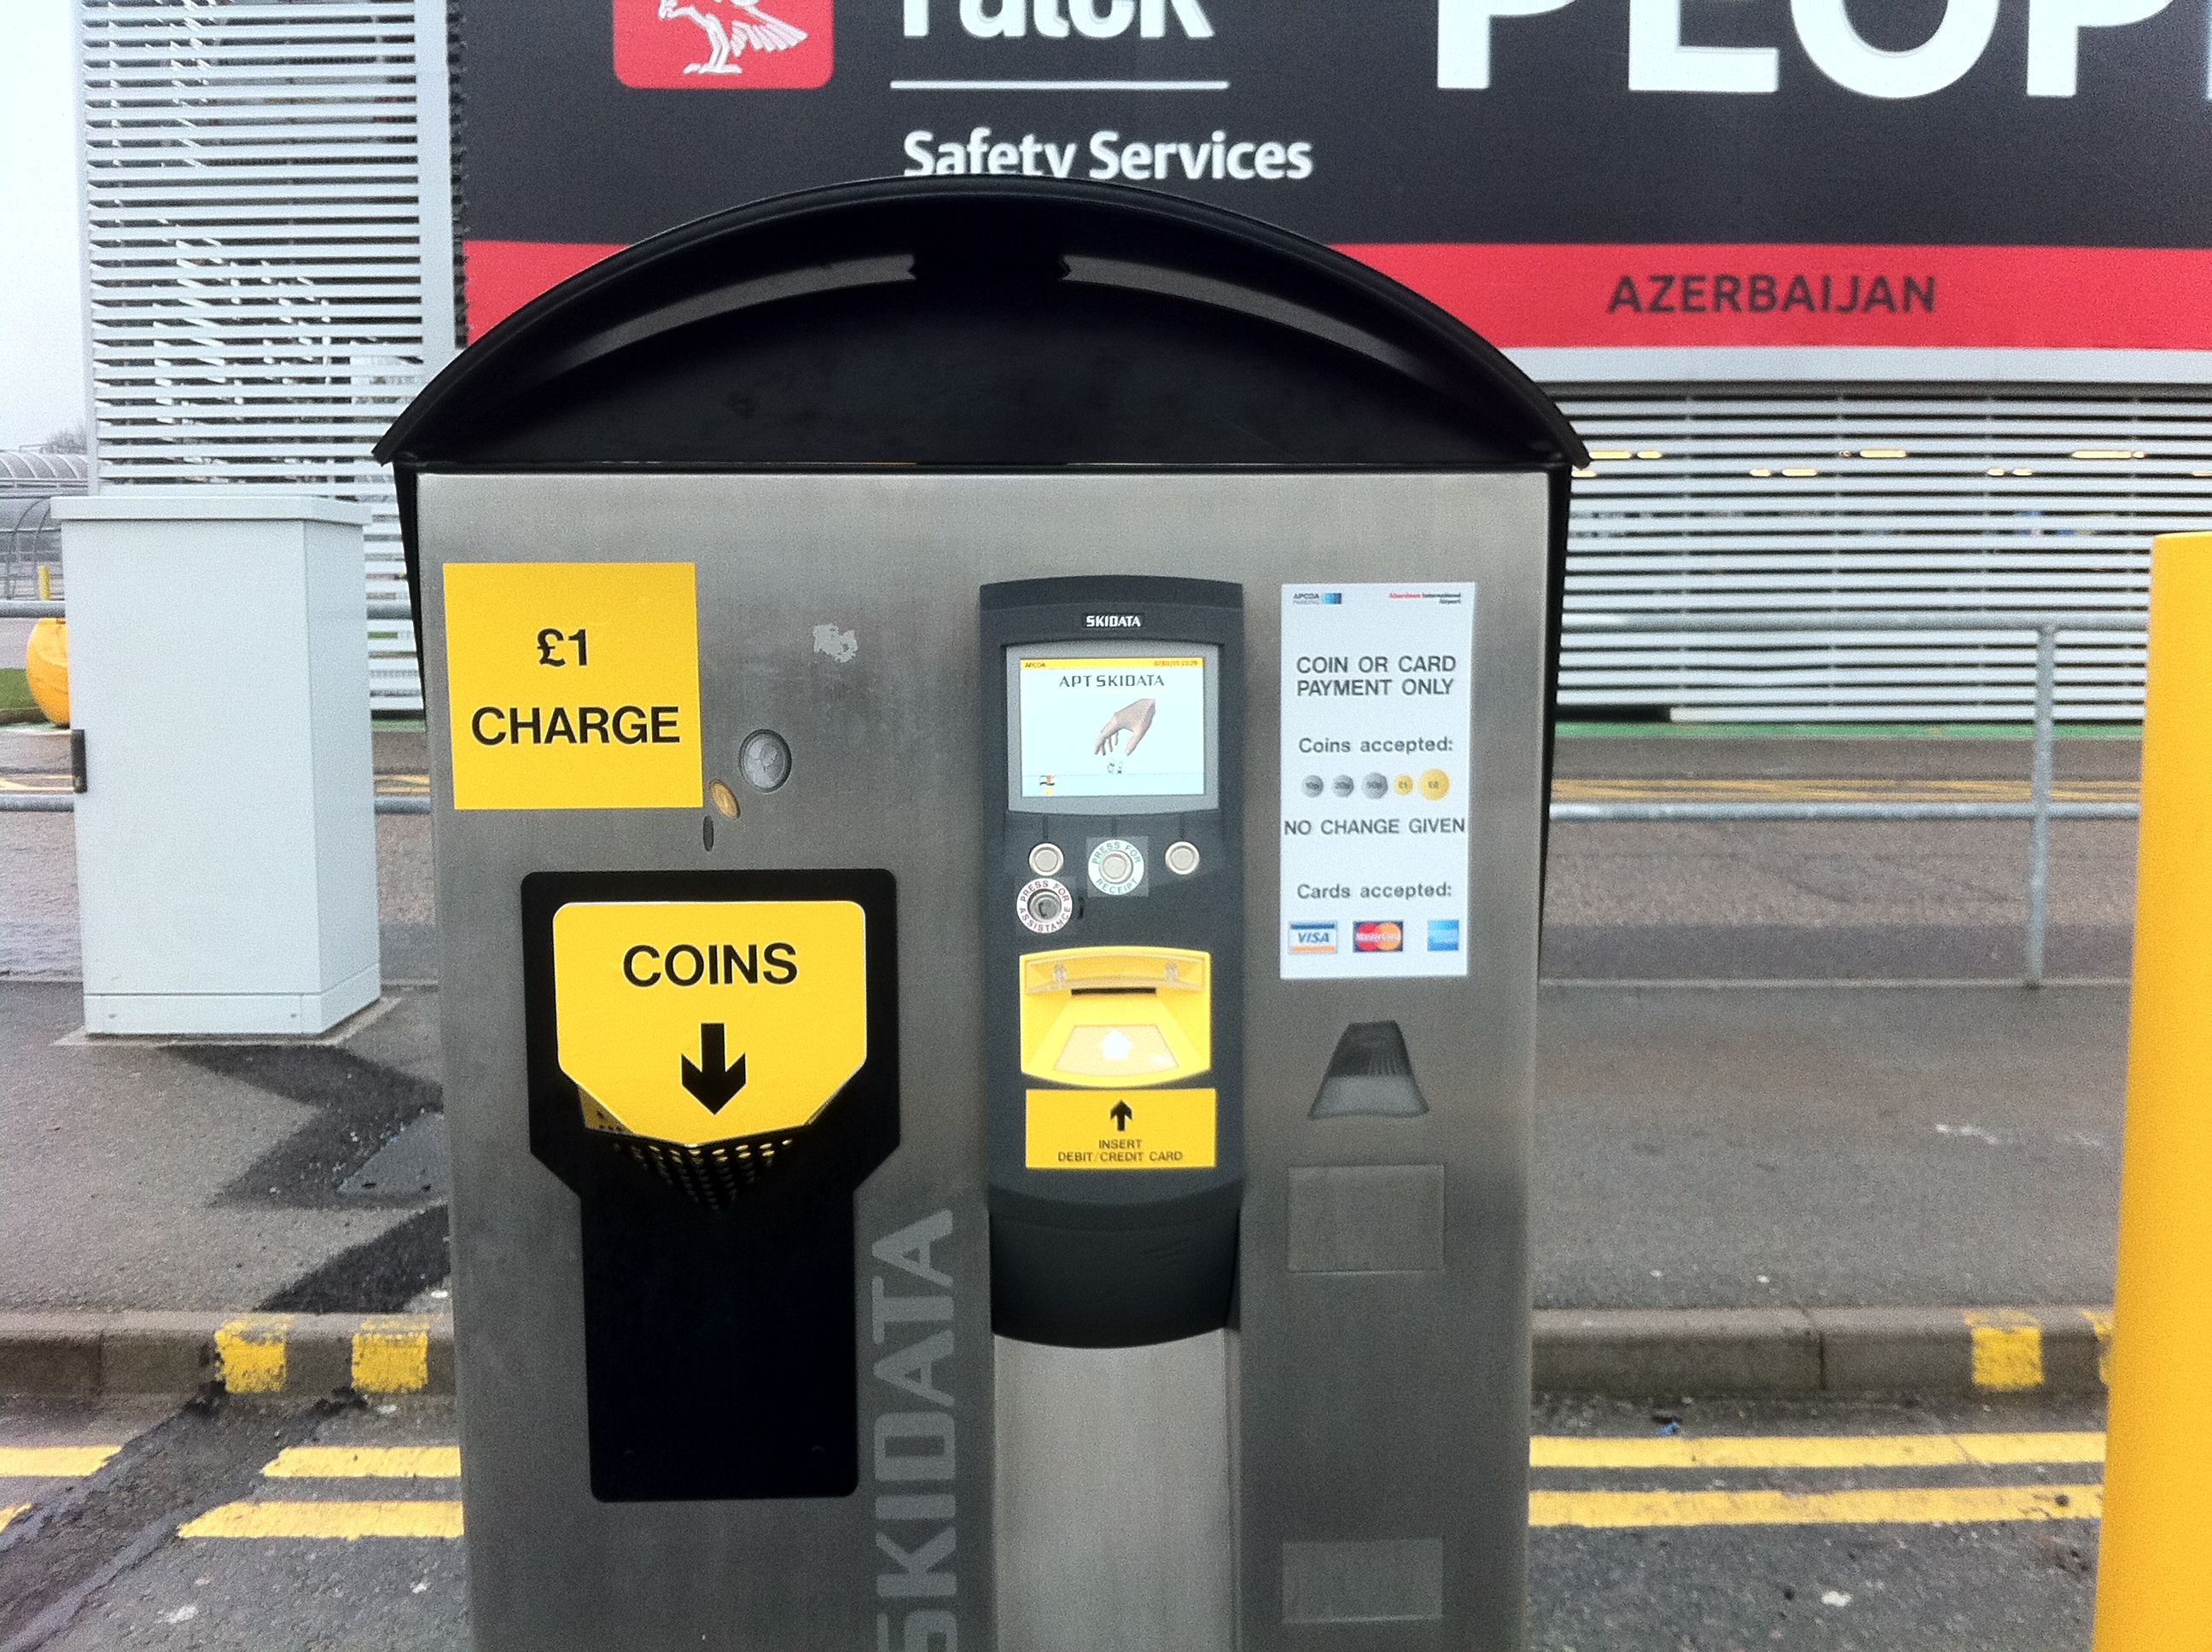 The new £1 drop-off charge came into effect at Aberdeen International Airport on Wednesday. 